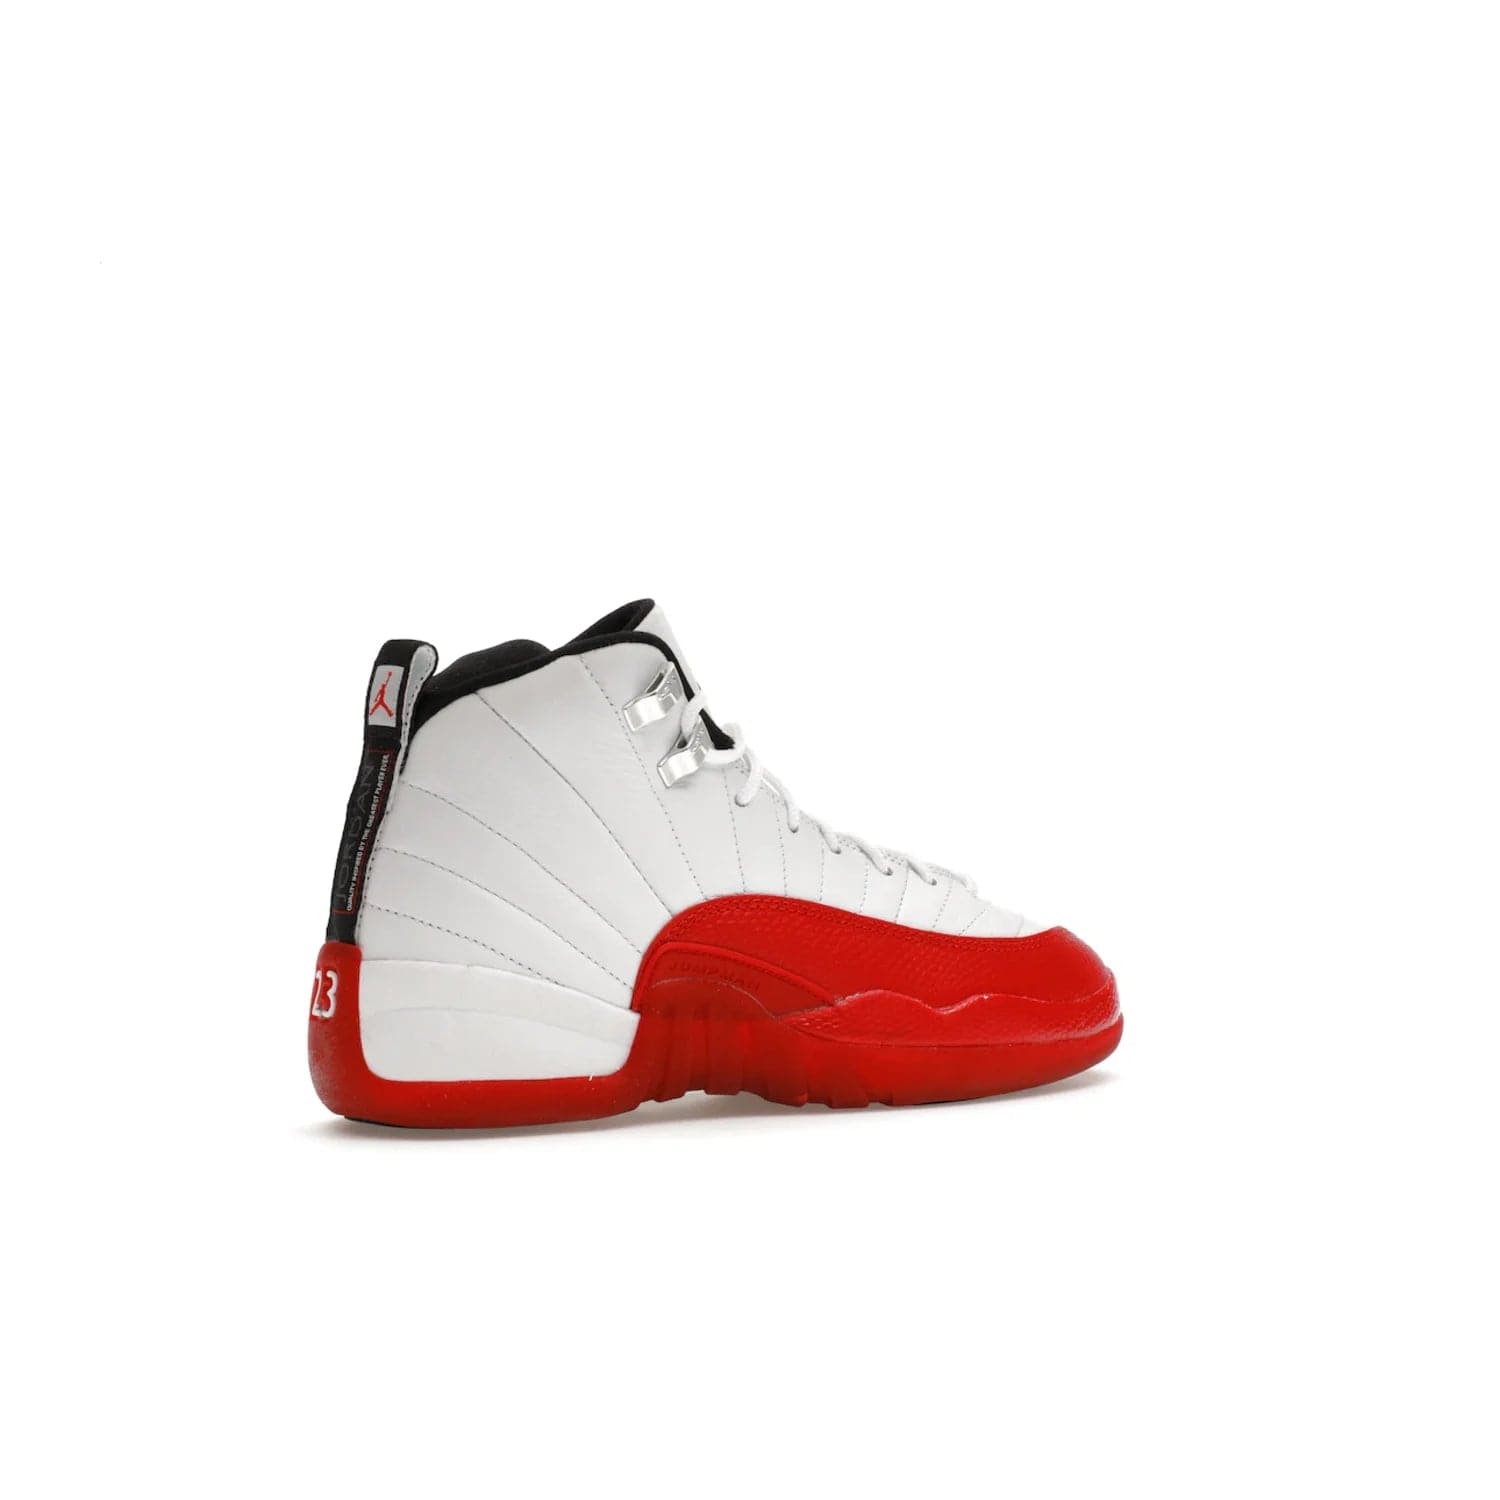 Jordan 12 Retro Cherry (2023) (GS) - Image 34 - Only at www.BallersClubKickz.com - Grab the Jordan 12 Retro Cherry (2023) (GS) and show off your signature style with these iconic kicks. Dressed in White, Black and Varsity Red, these timeless kicks are sure to turn heads. Available October 28, 2023.